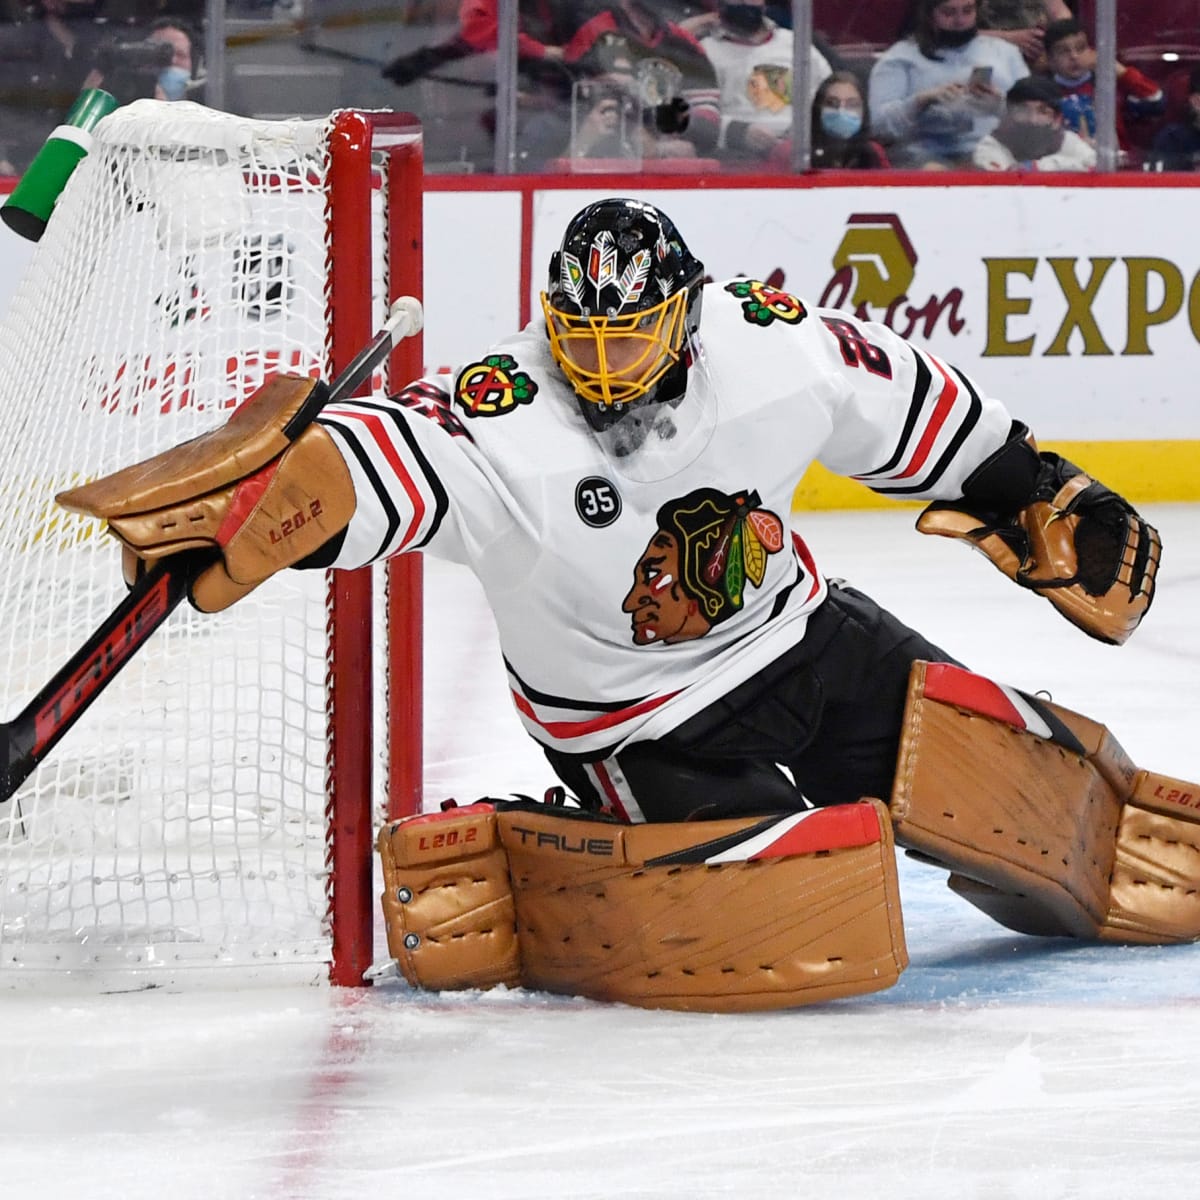 Marc-Andre Fleury says he will play for Chicago following trade